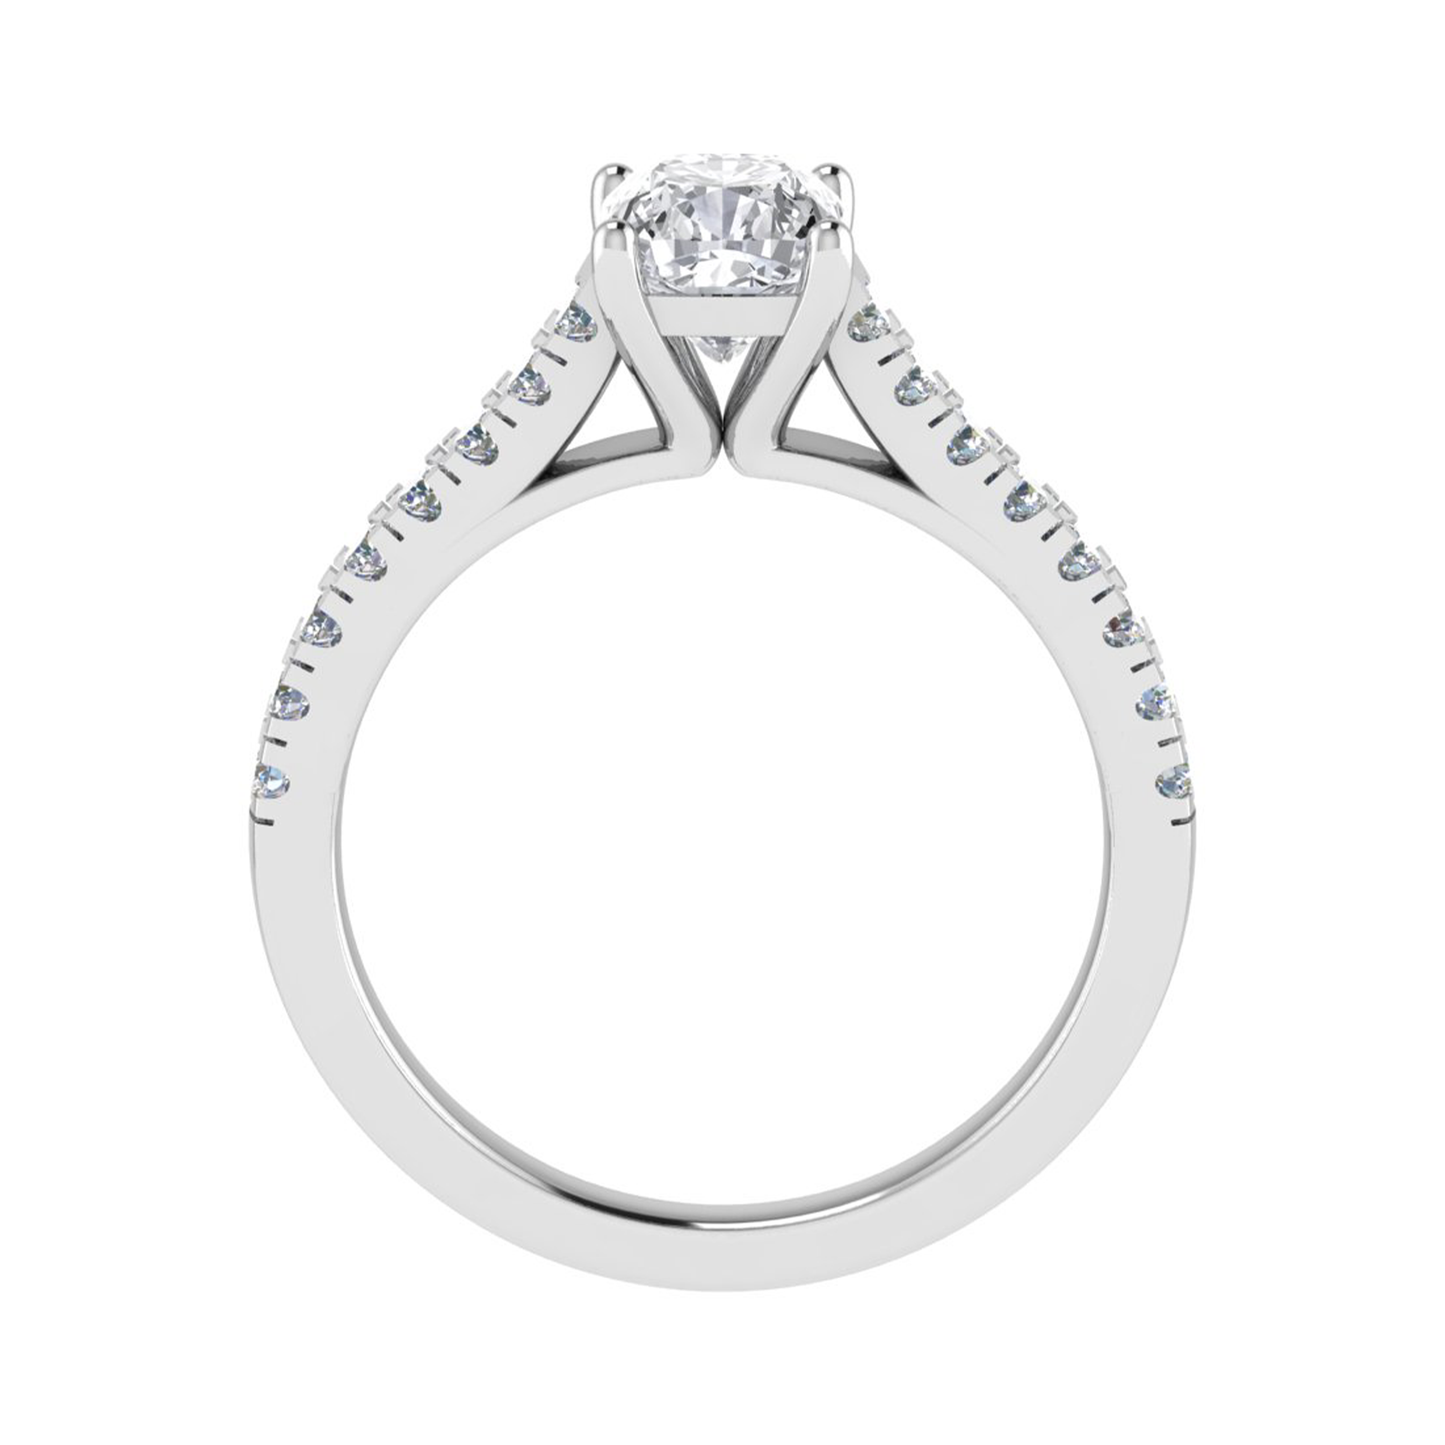 4mm Cushion Ring with Diamond set shoulders